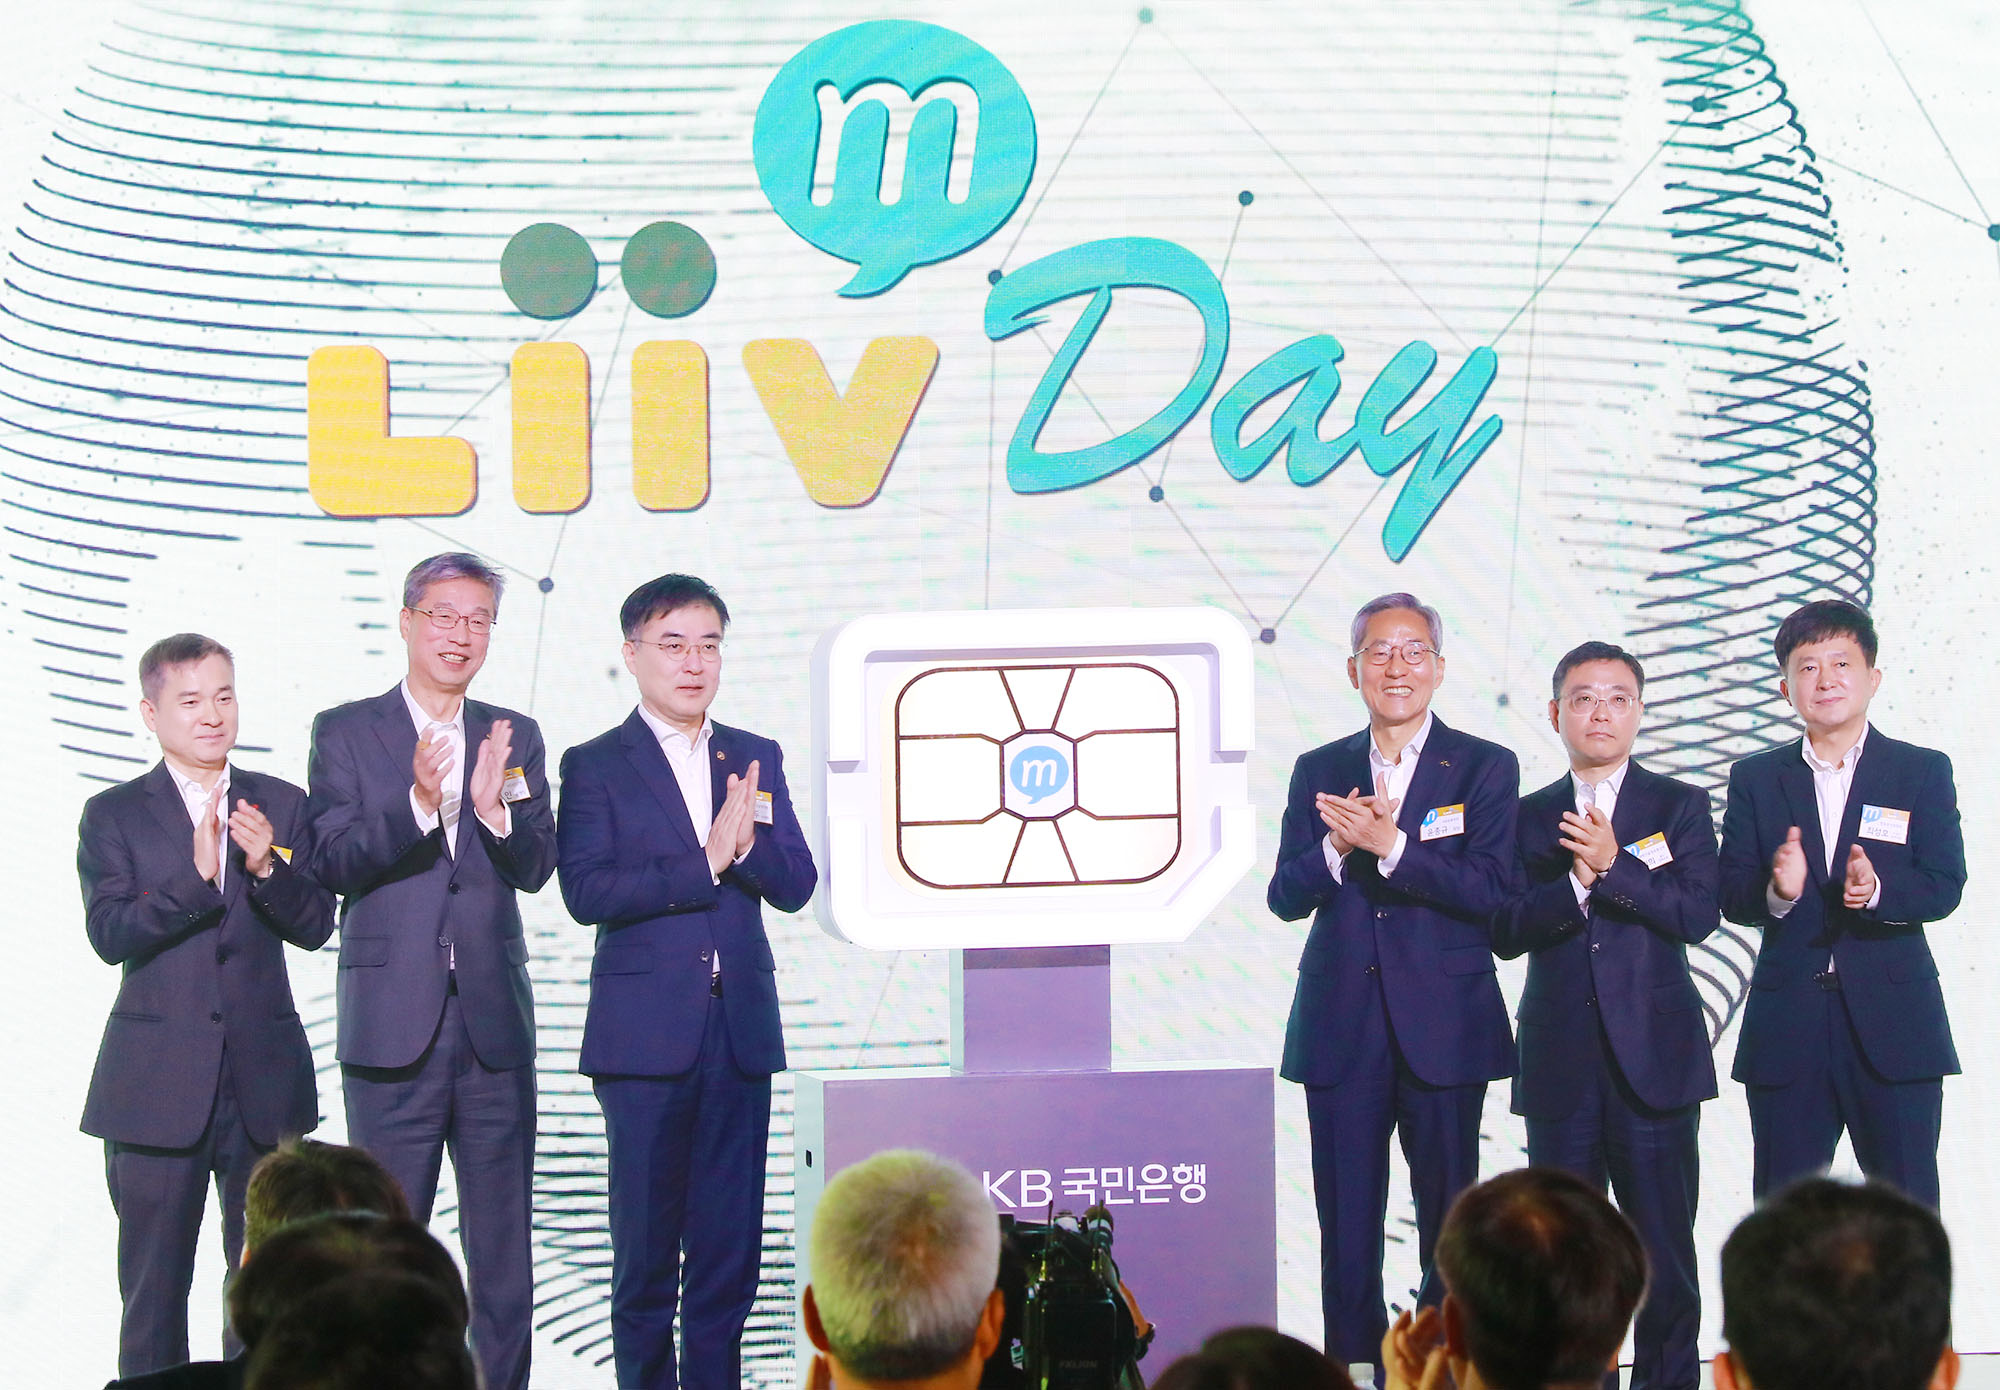 Launch of Liiv M, a new mobile service that integrates finance and telecommunications